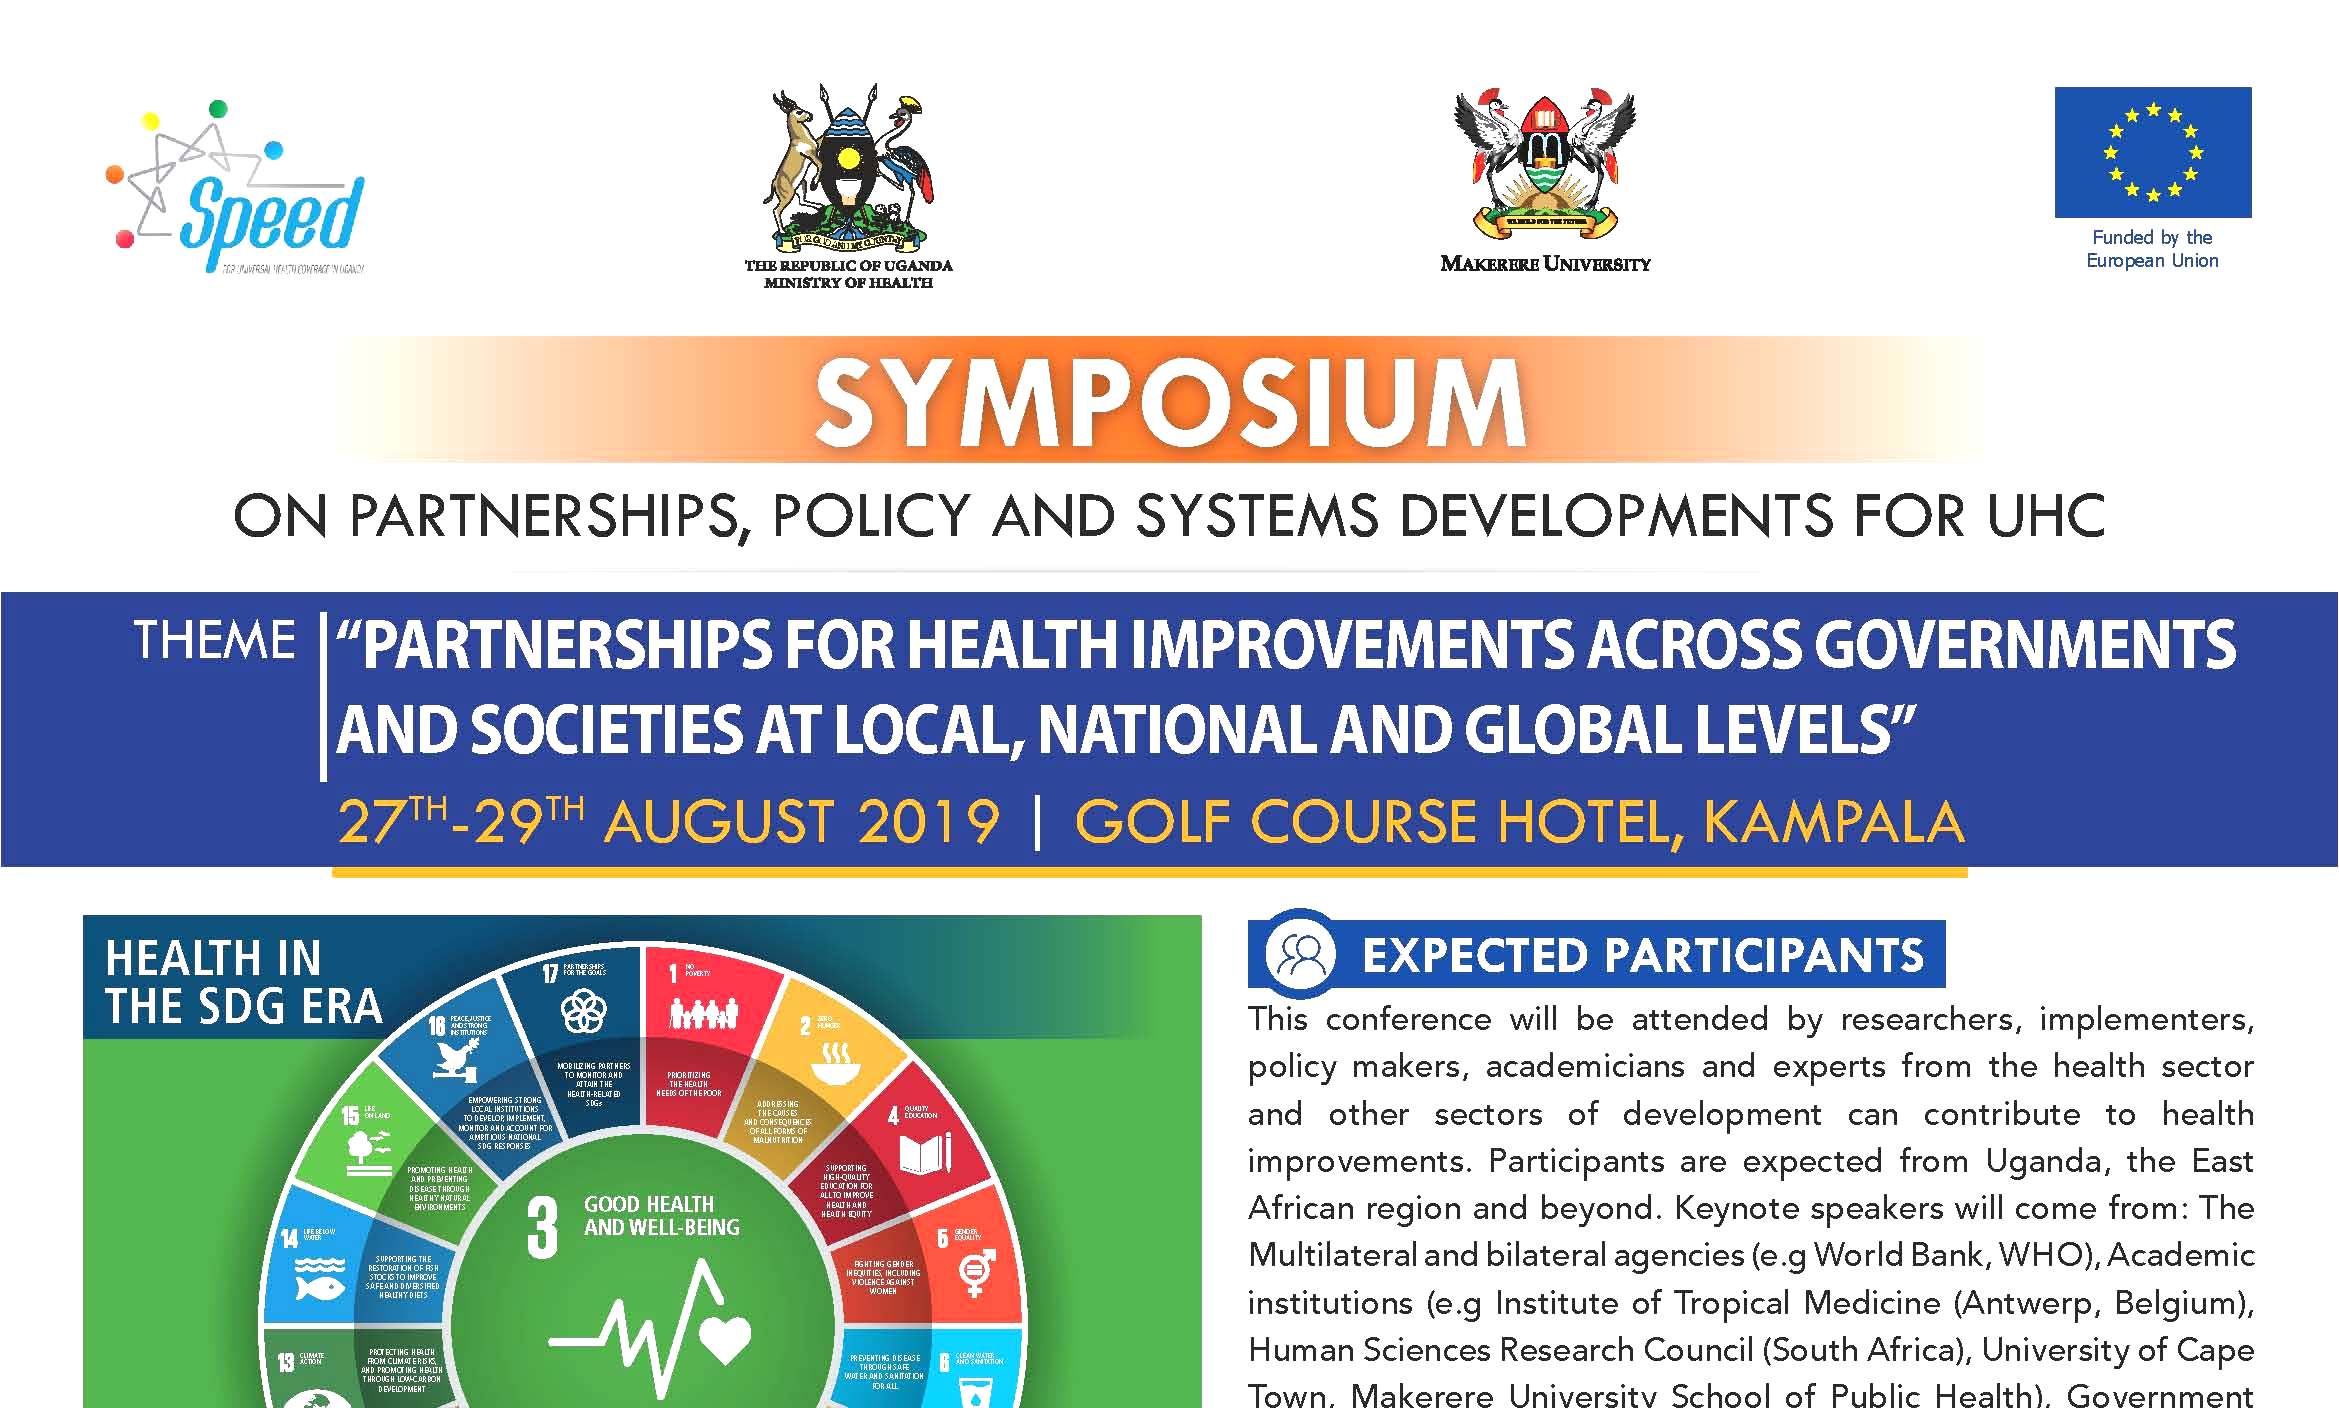 The Symposium on Partnerships, Policy and Systems Developments for Universal Health Coverage (UHC), 27th-29th August 2019, Golf Course Hotel, Kampala Uganda